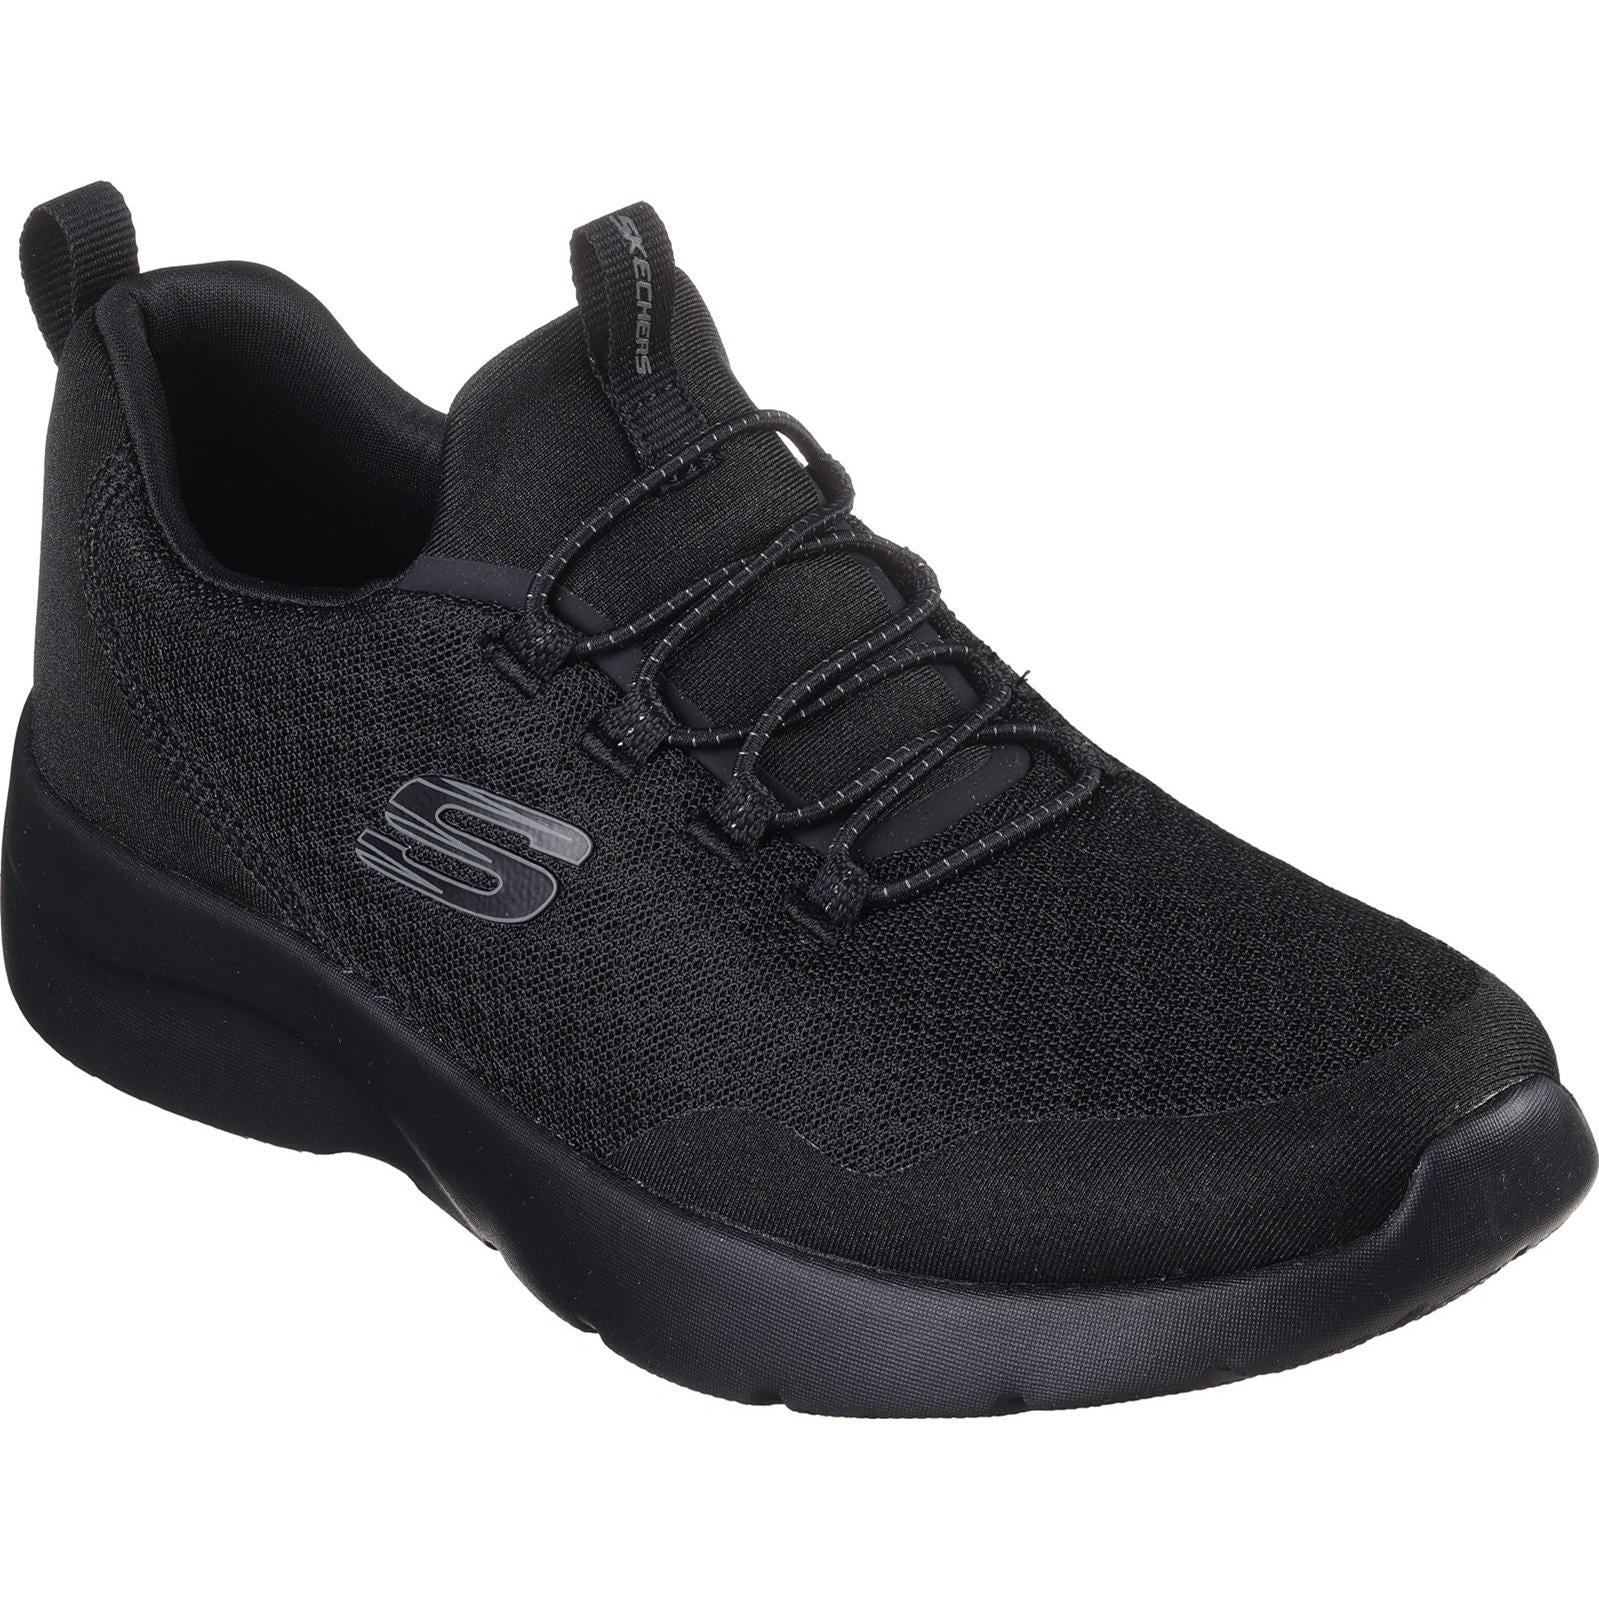 Skechers Dynamight 2.0 - Real Smooth Shoe